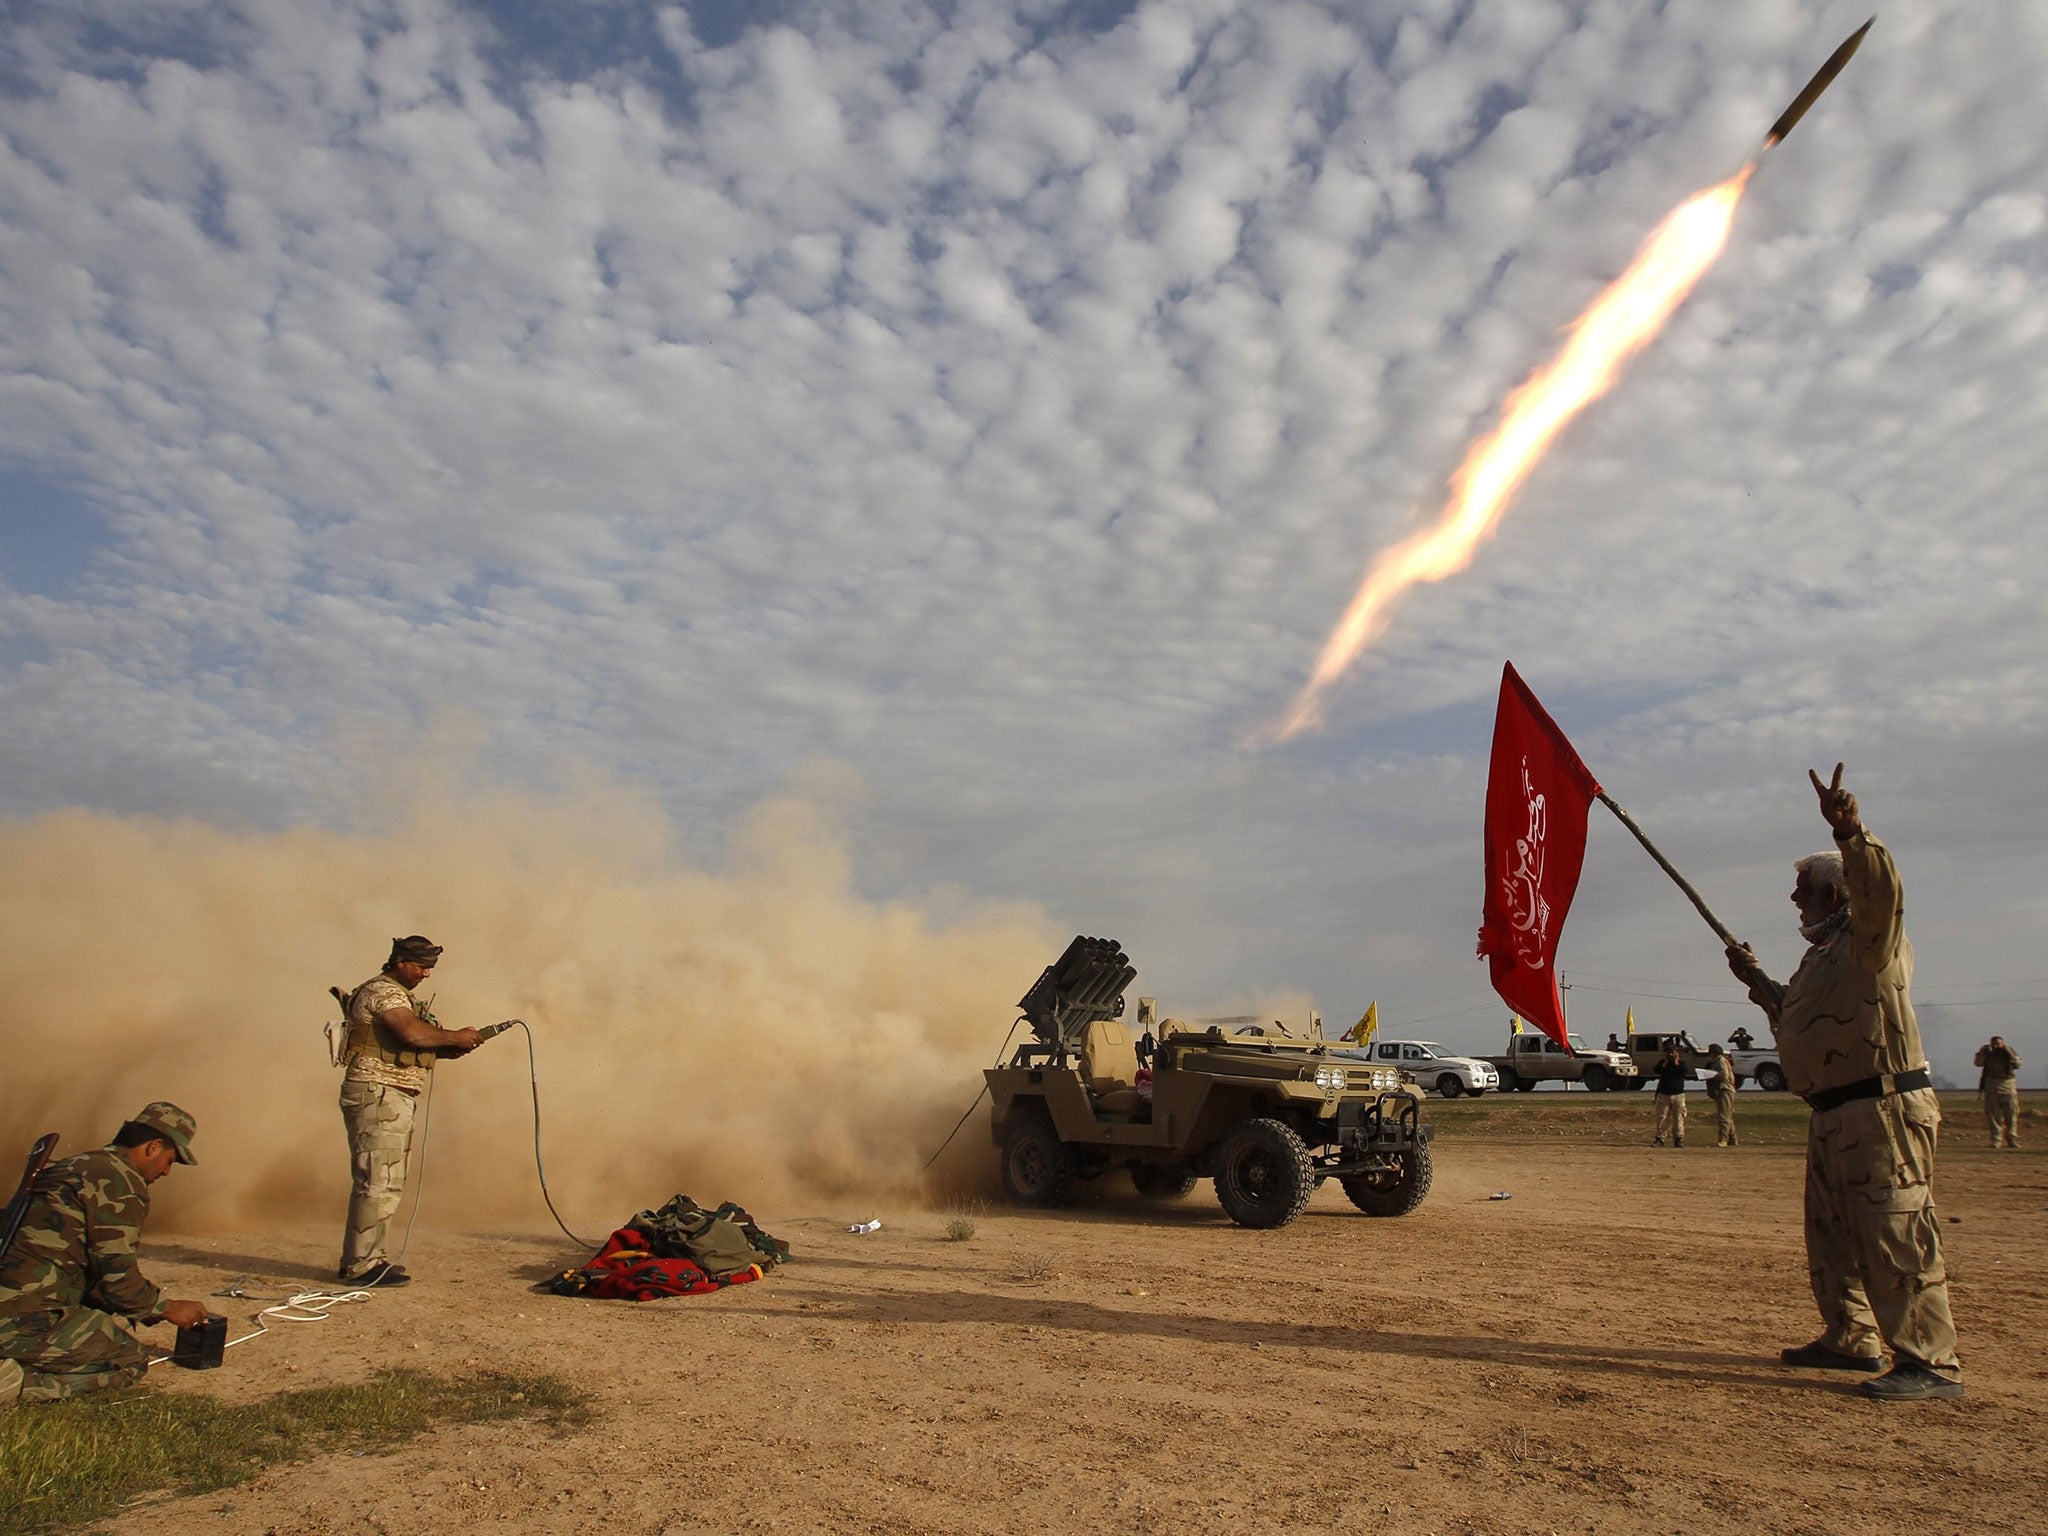 Iraqi forces fought back to take Tikrit and the surrounding desert in 2015. Here, Shia fighters are seen launching a rocket during clashes with Isis militants on the outskirts of the city